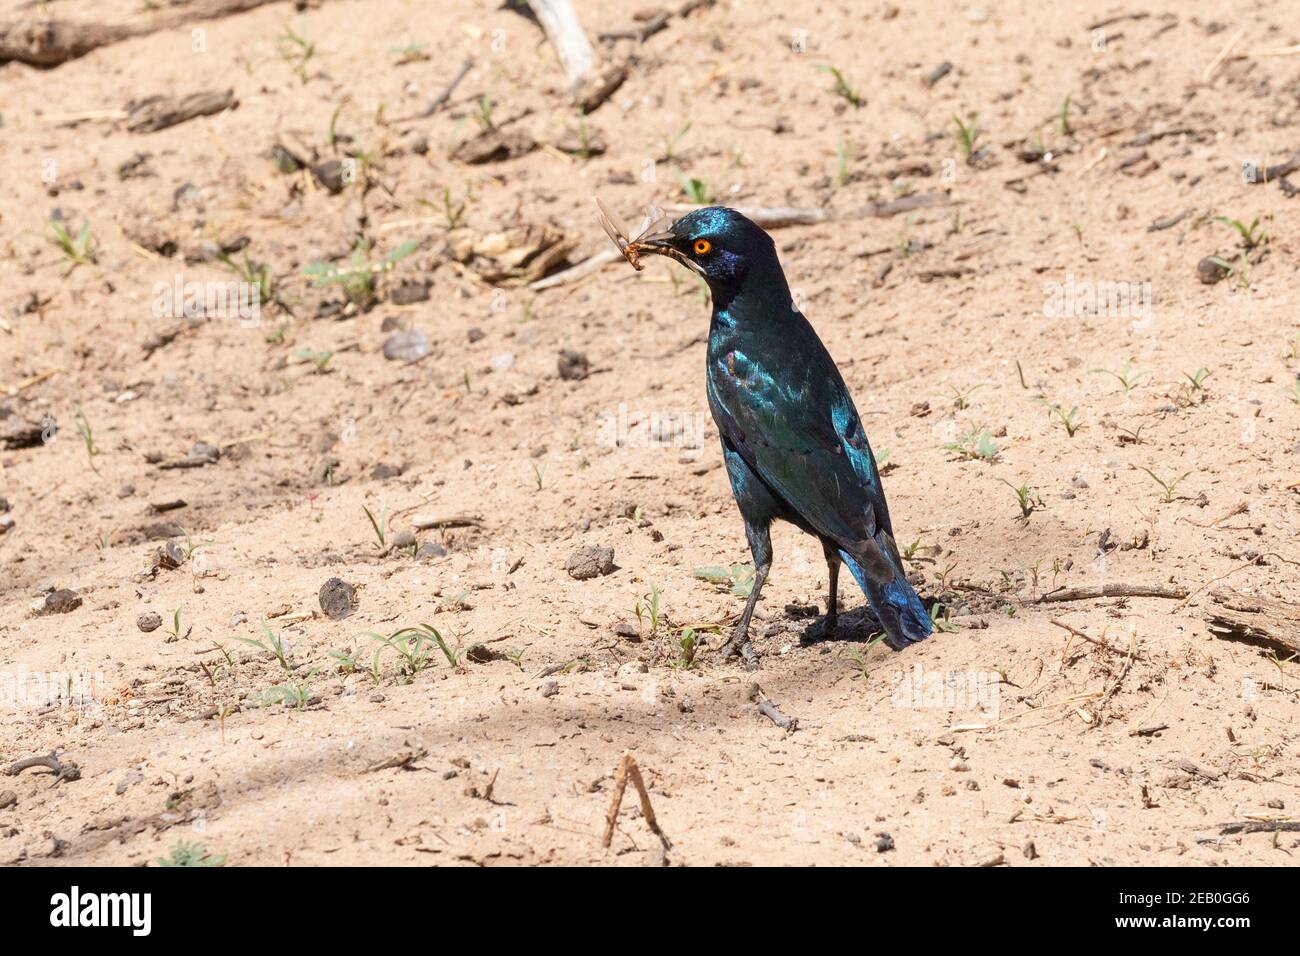 Cape Glossy Starling (Lamprotornis nitens) aka Red-shouldered Glossy Starling  foraging with insect prey, Kgalagadi Transfrontier Park, South Africa Stock Photo